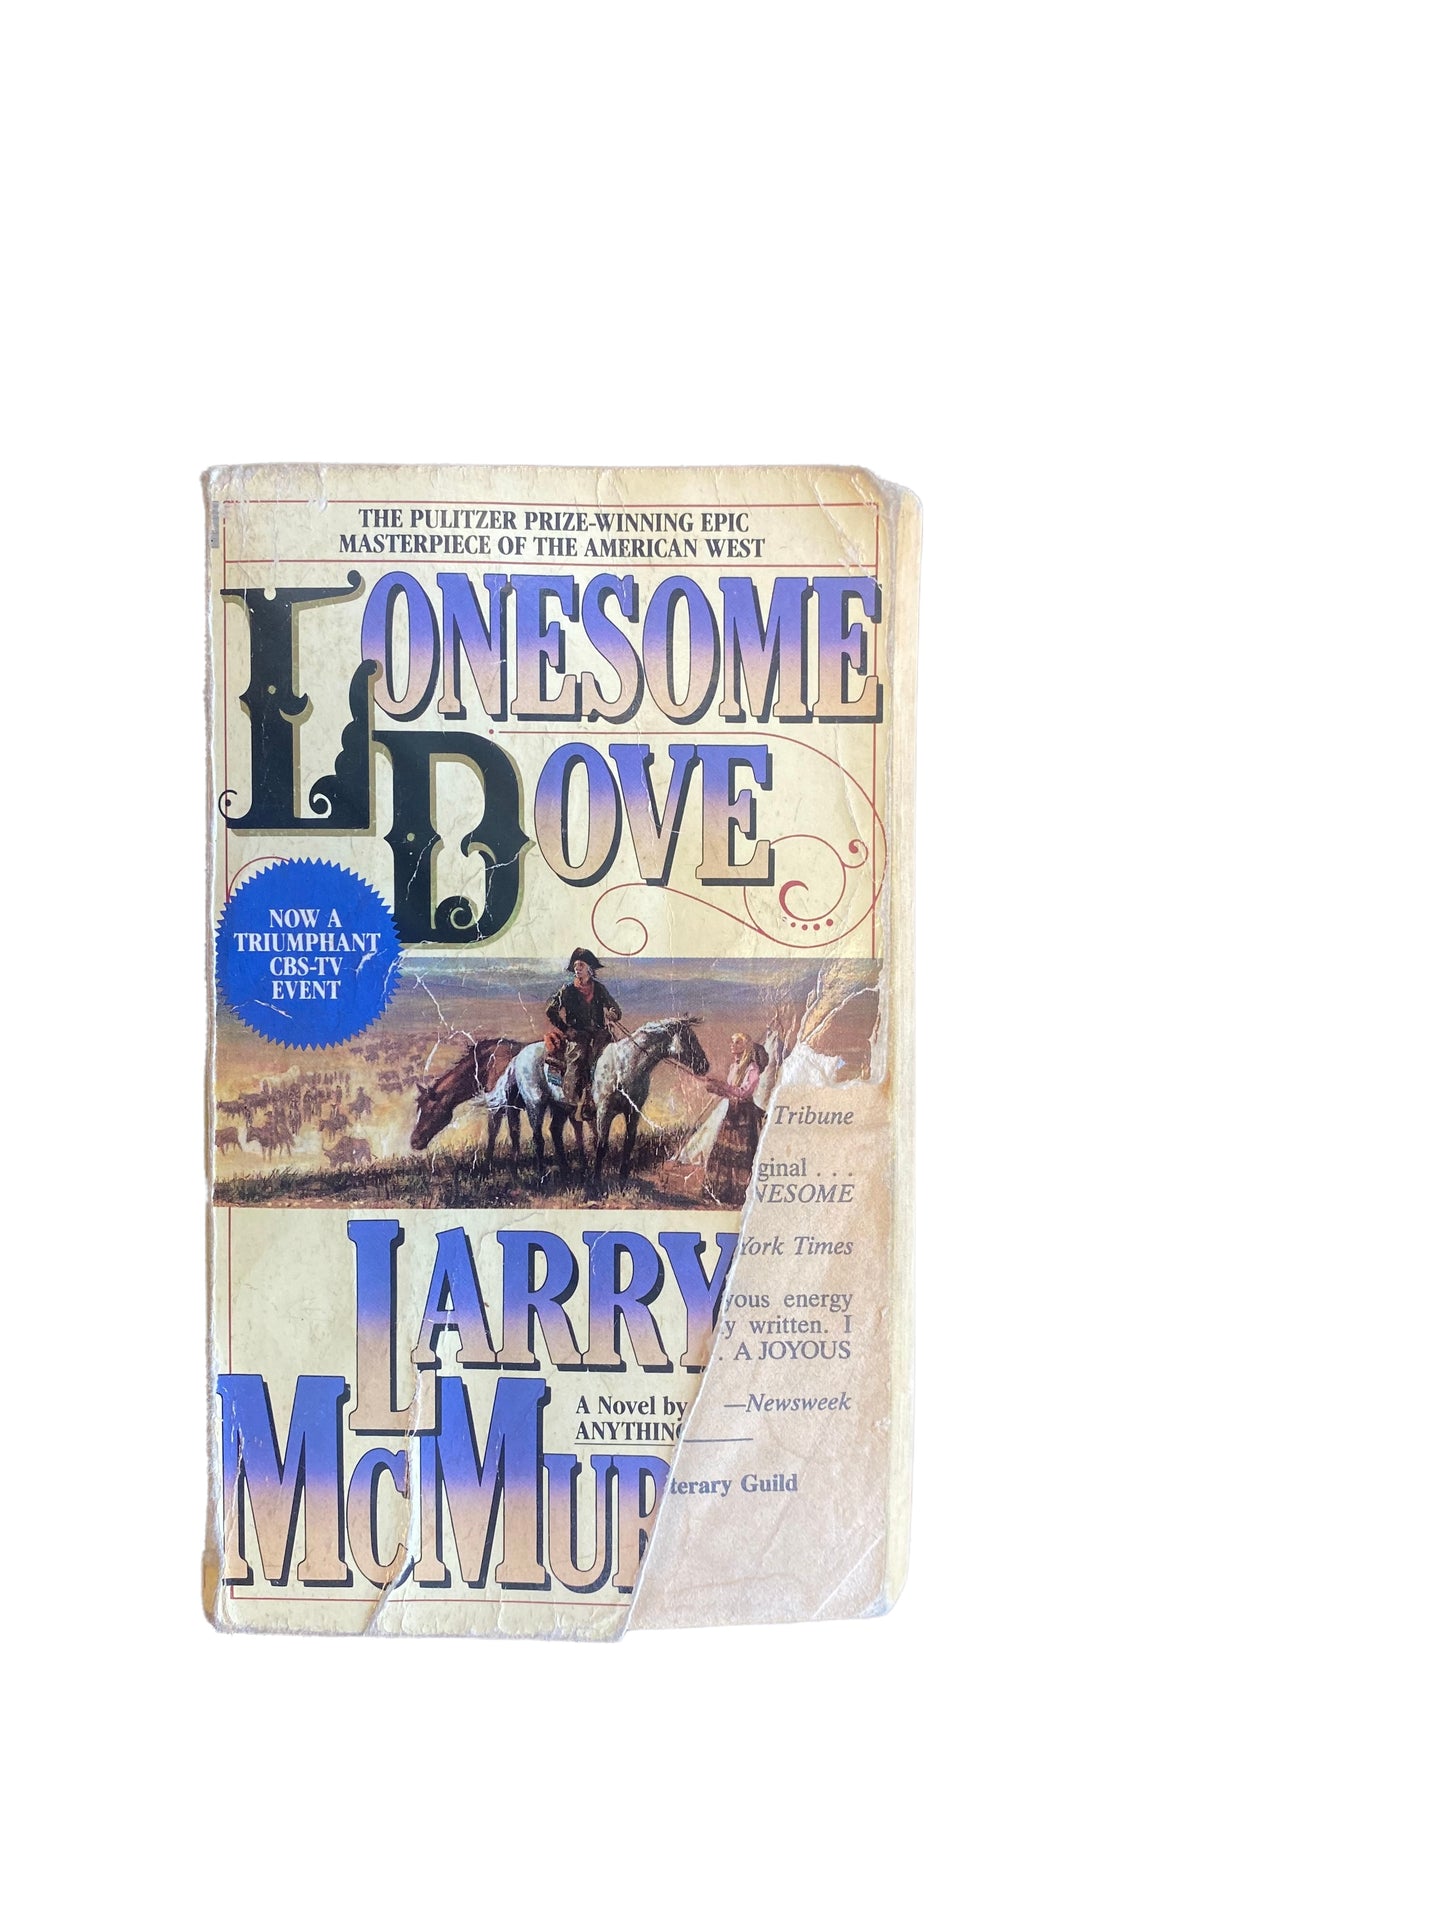 Lonesome Dove by Larry McMurtry 1986 paperback